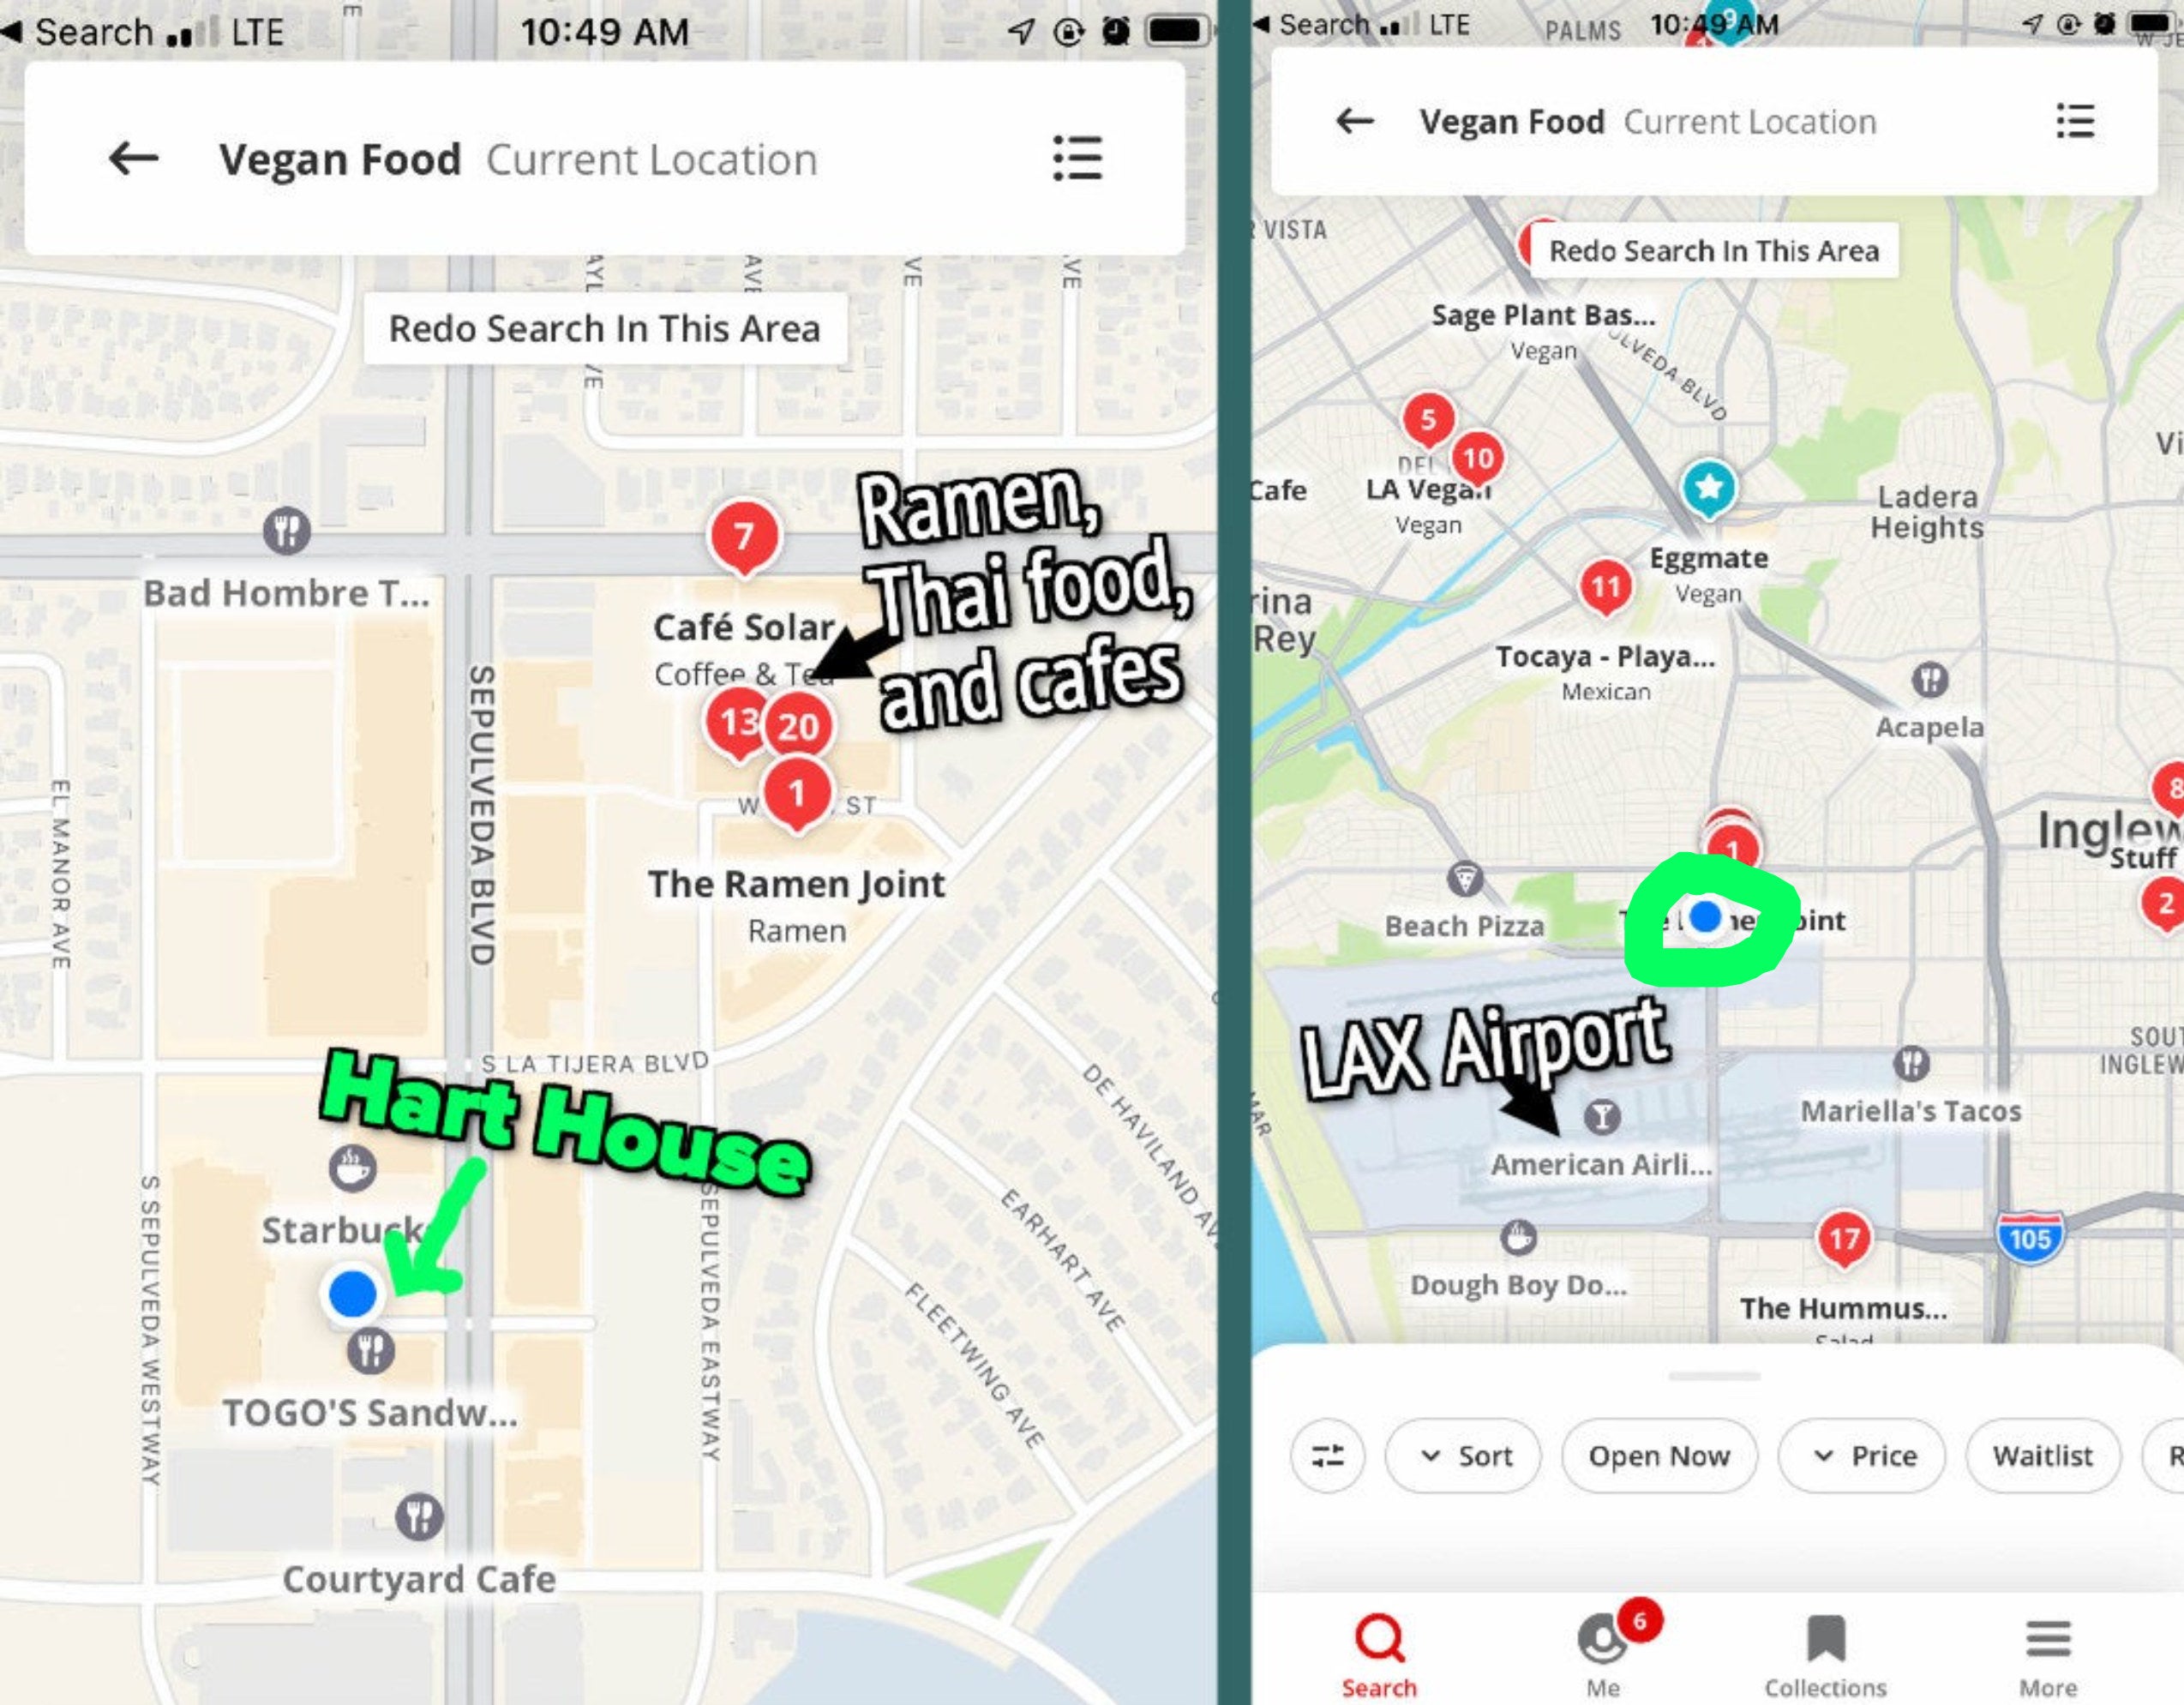 yelp search of vegan food around the hart house location